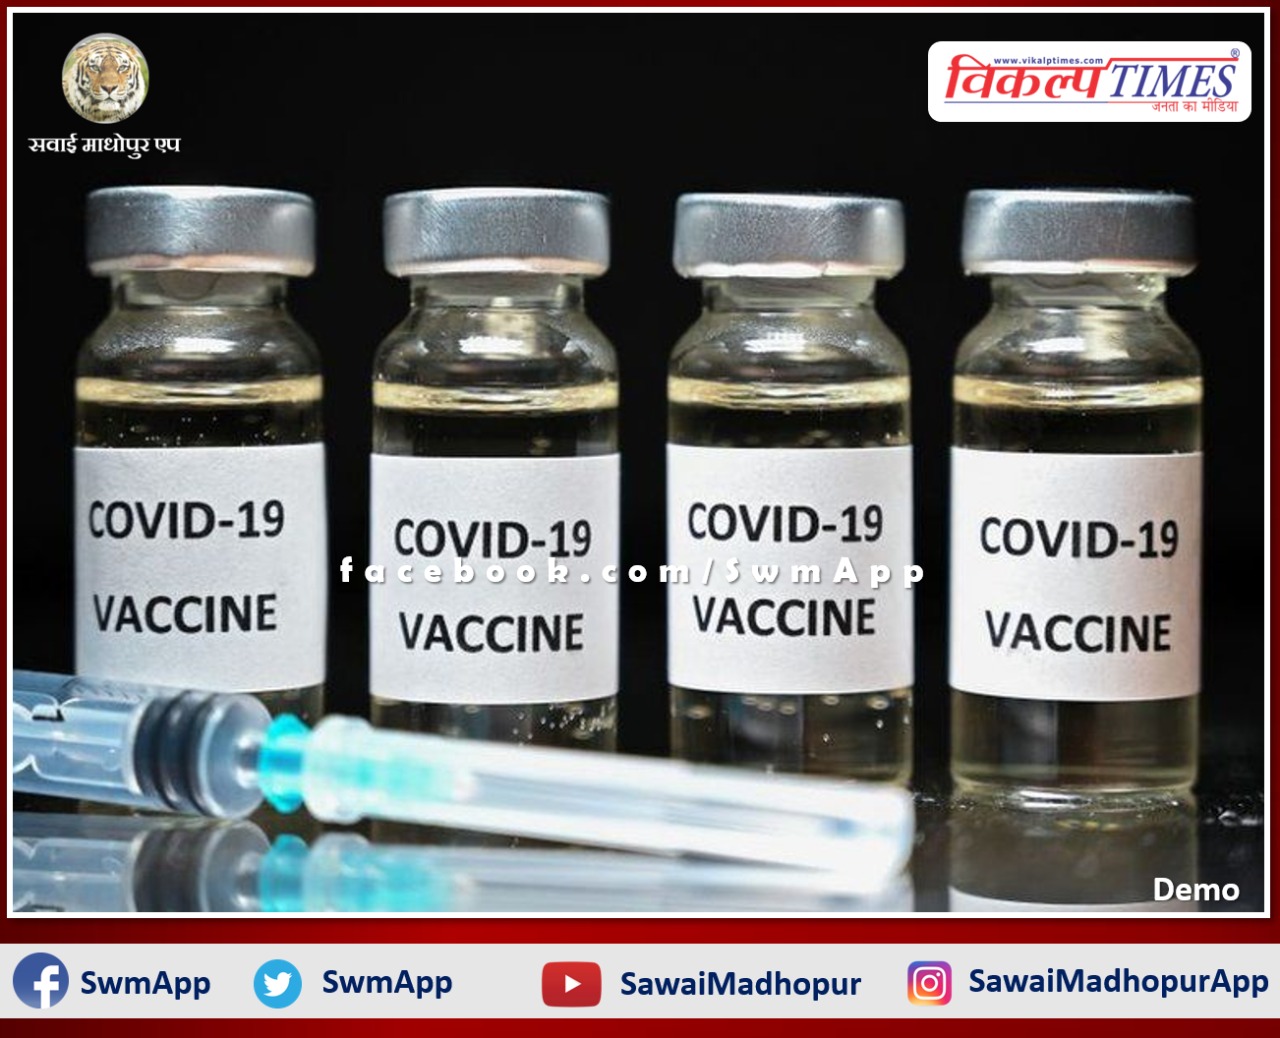 Covid vaccination campaign will run from 2 to 4 December in sawai madhopur